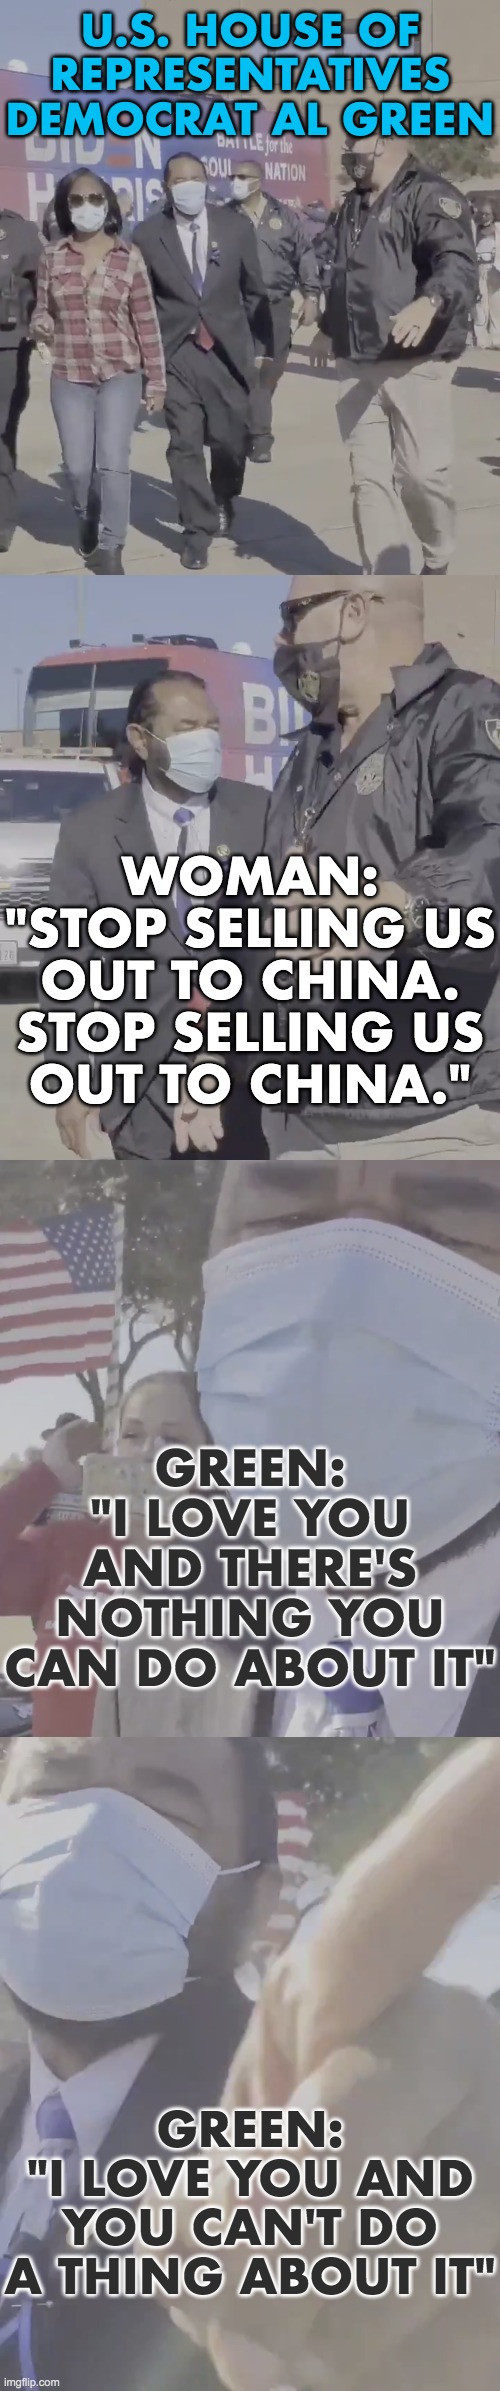 U.S. HOUSE OF REPRESENTATIVES
DEMOCRAT AL GREEN WOMAN:
"STOP SELLING US
OUT TO CHINA.
STOP SELLING US
OUT TO CHINA." GREEN:
"I LOVE YOU AND  | made w/ Imgflip meme maker